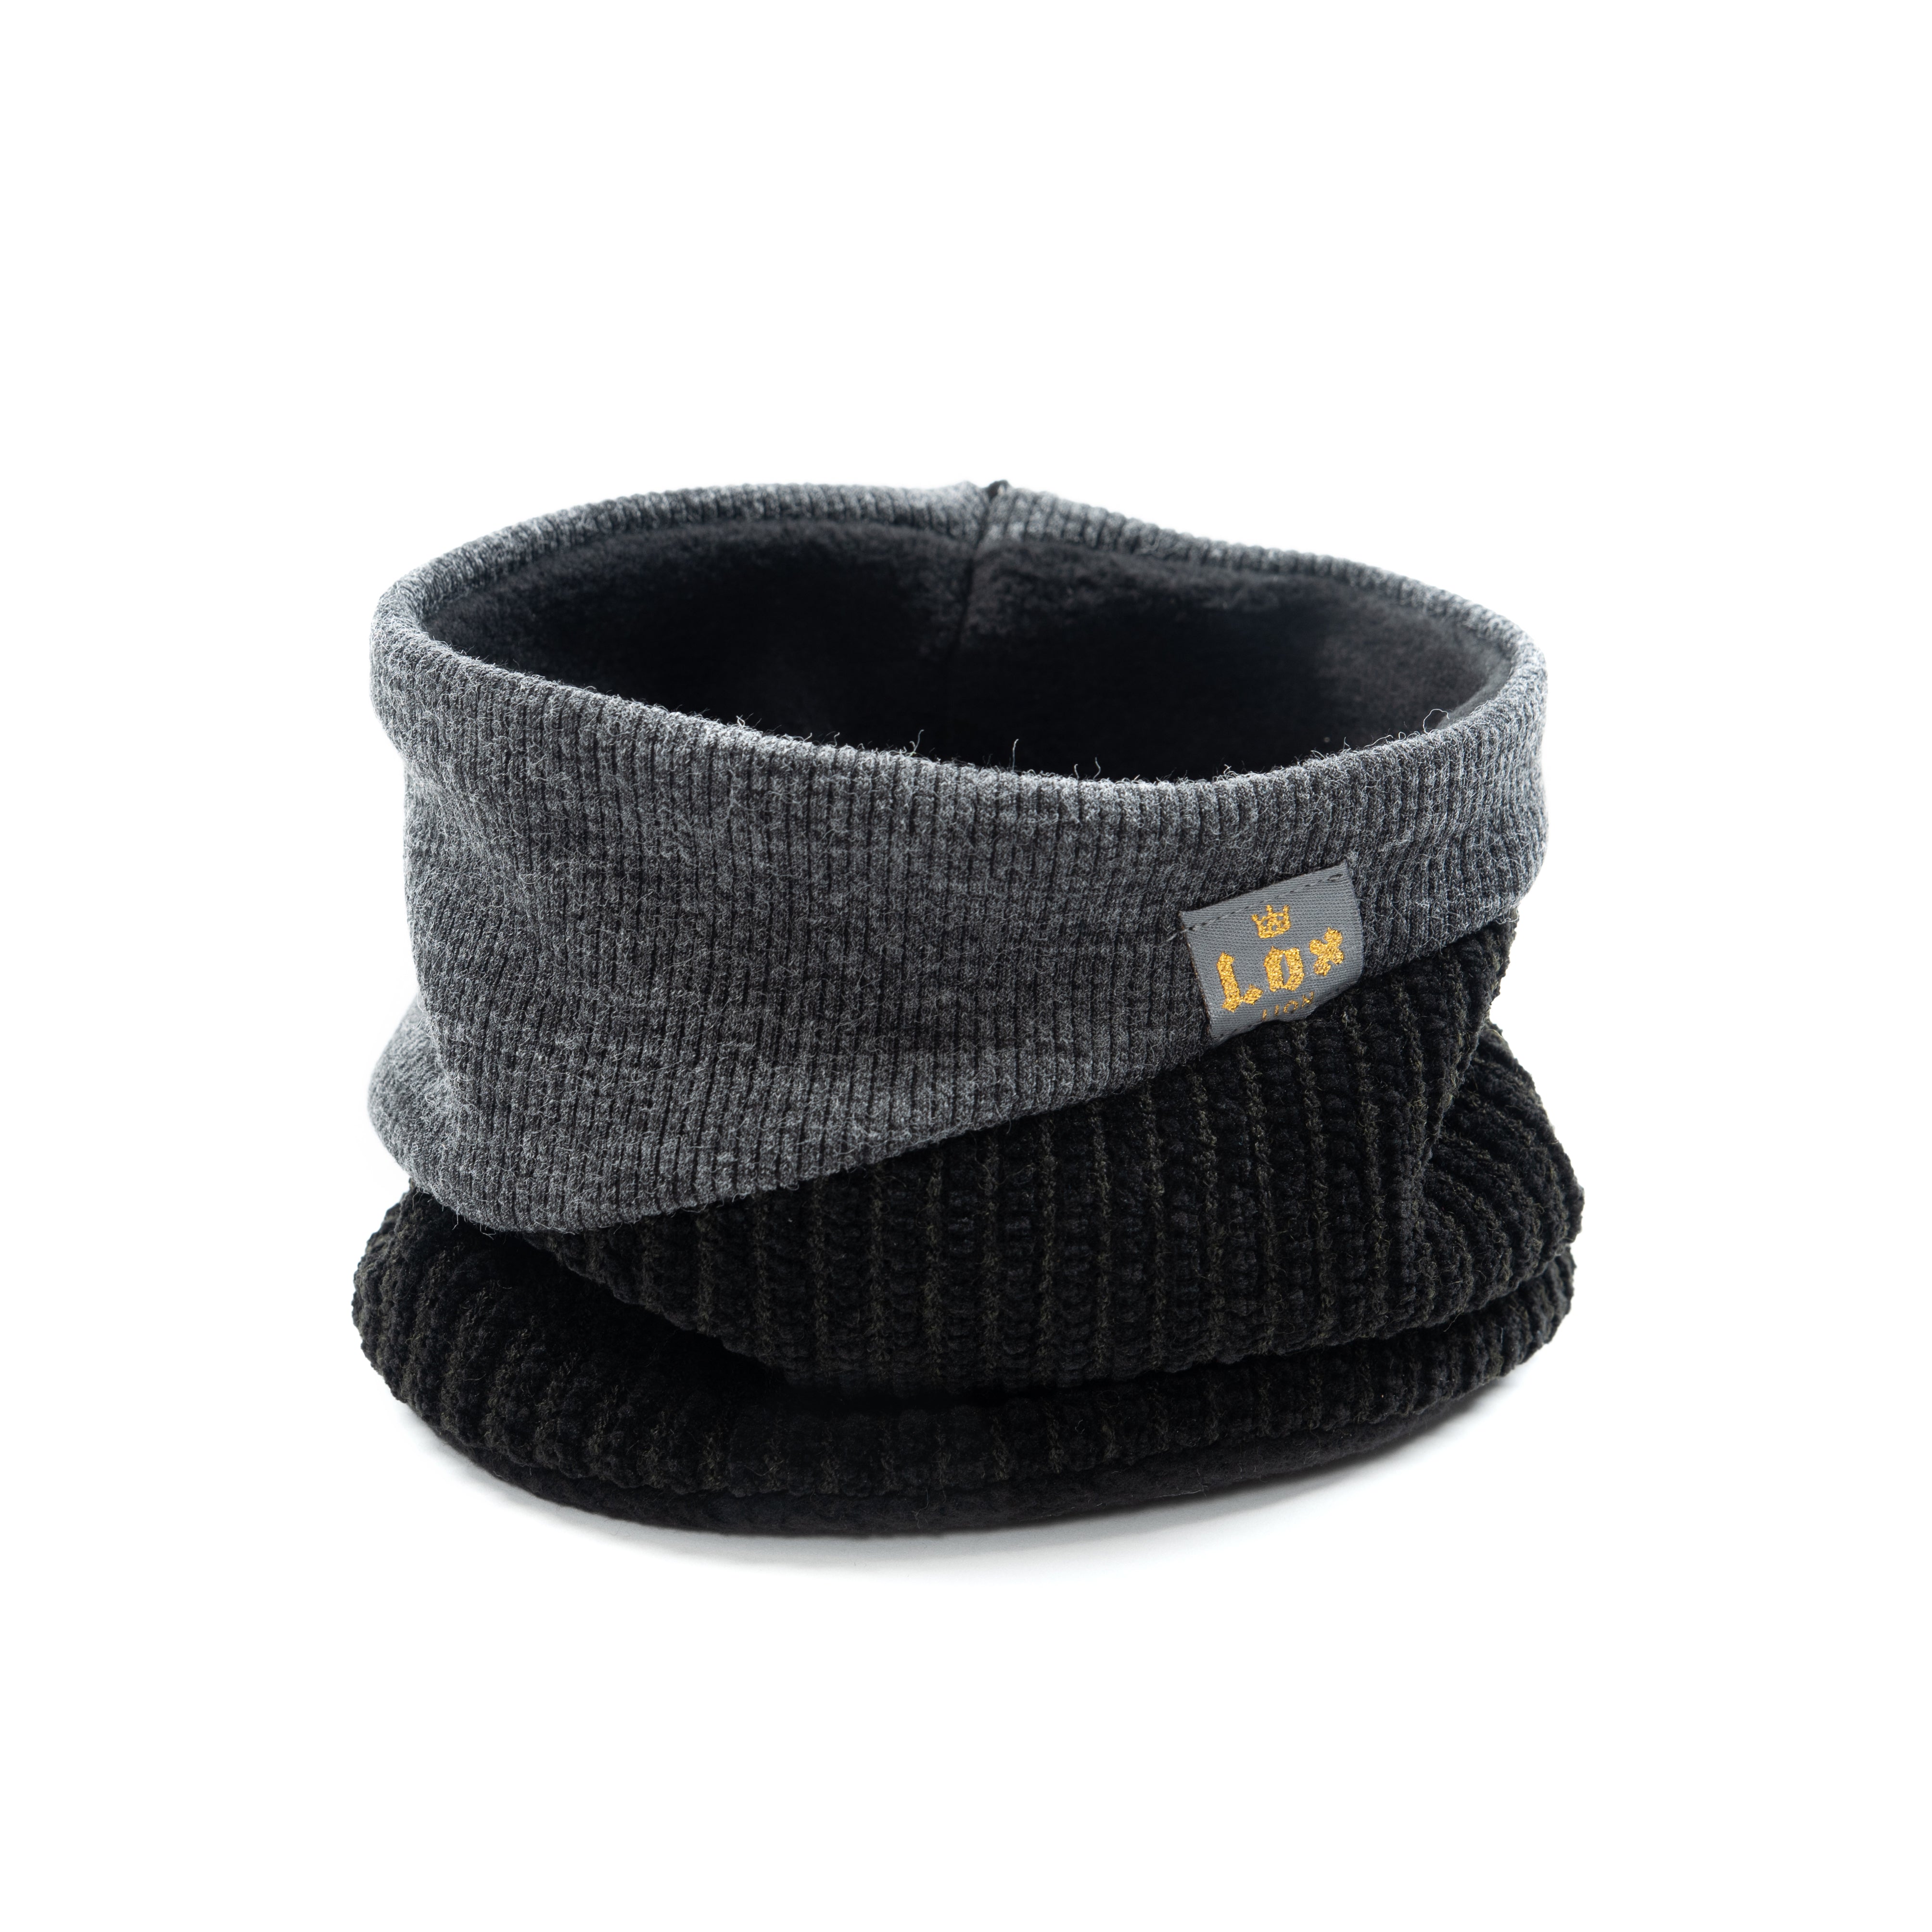 Knitted Winter Neck Warmer